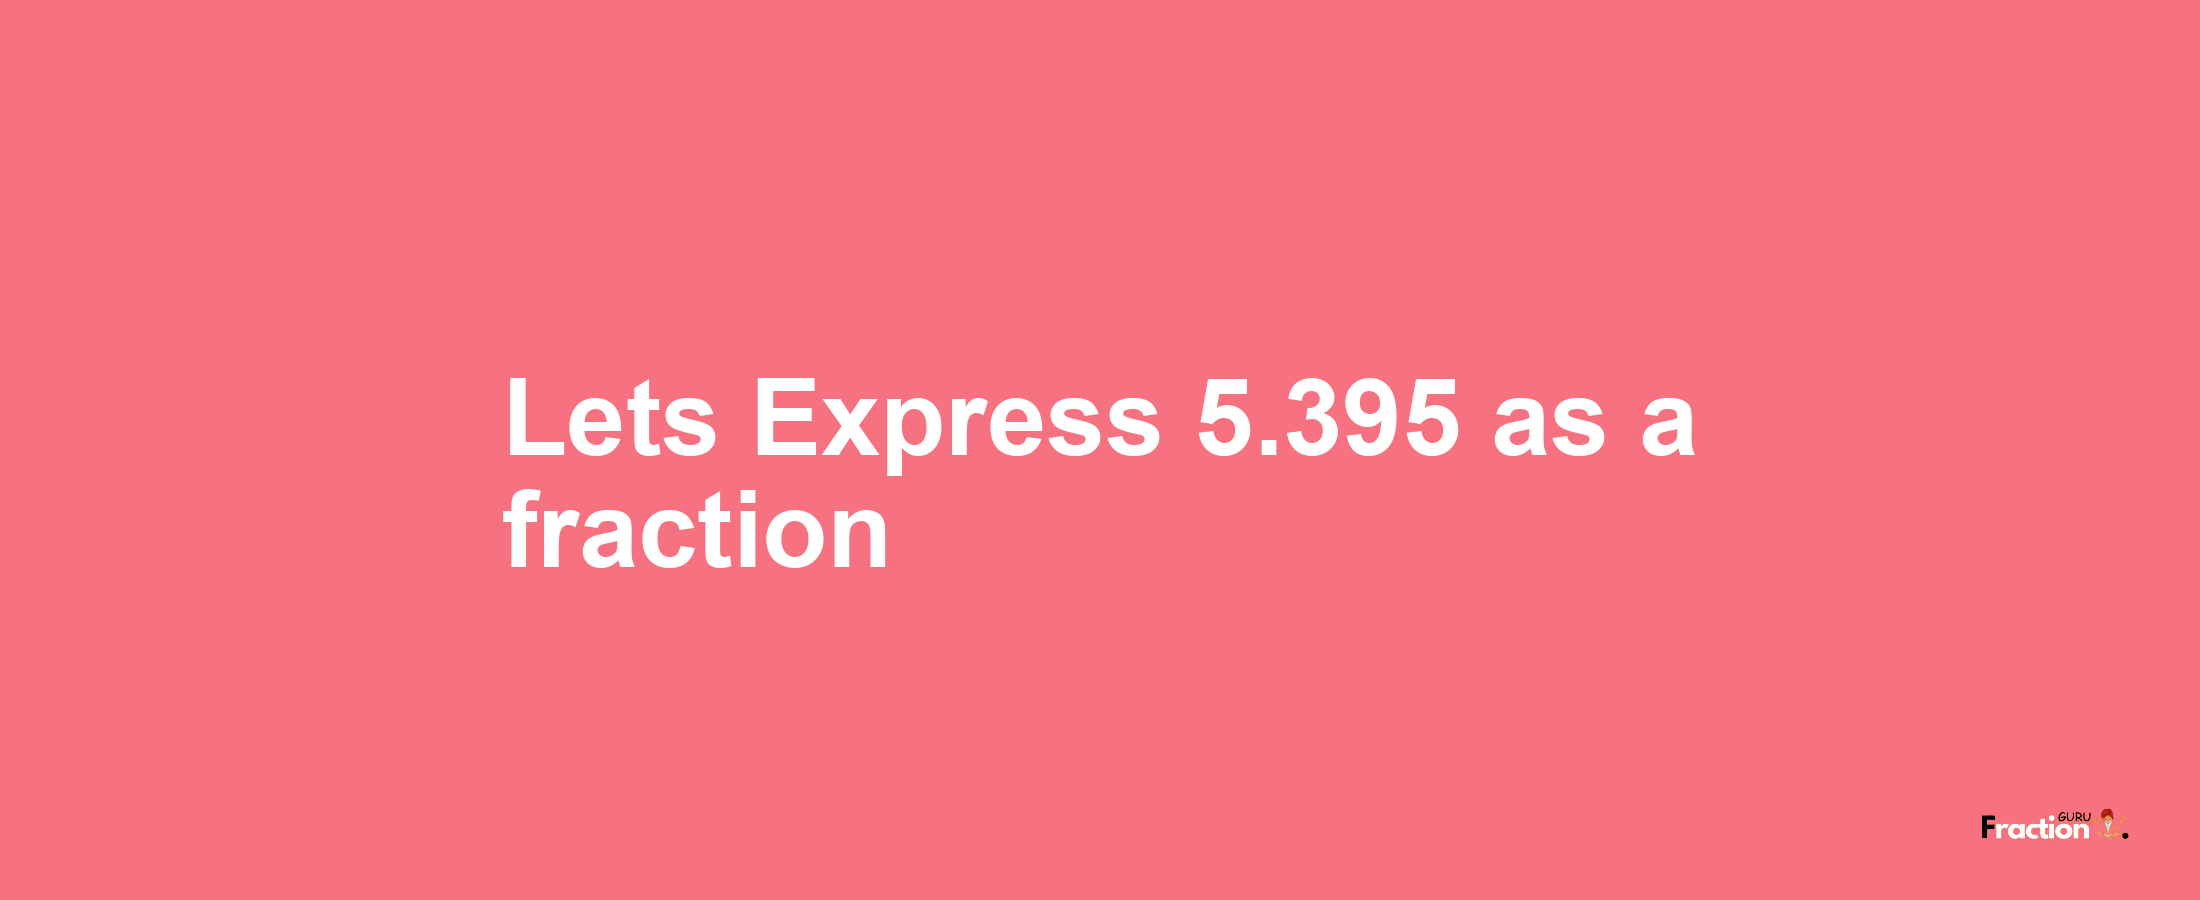 Lets Express 5.395 as afraction